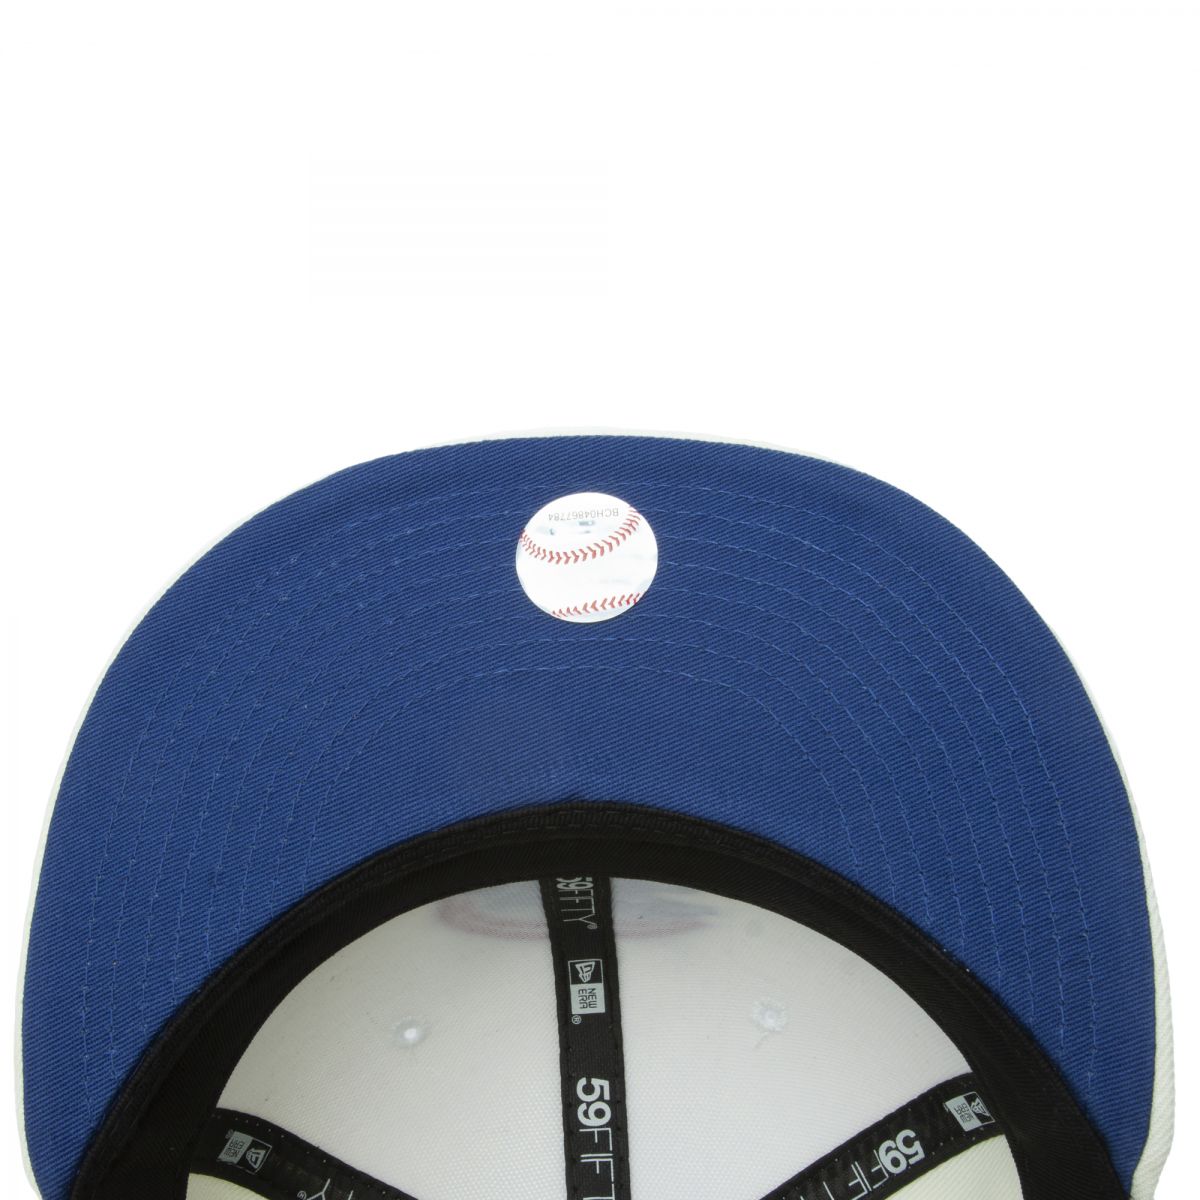 NEW ERA CAPS Chicago Cubs Chrome 59FIFTY Fitted Hat 70714825 - Karmaloop